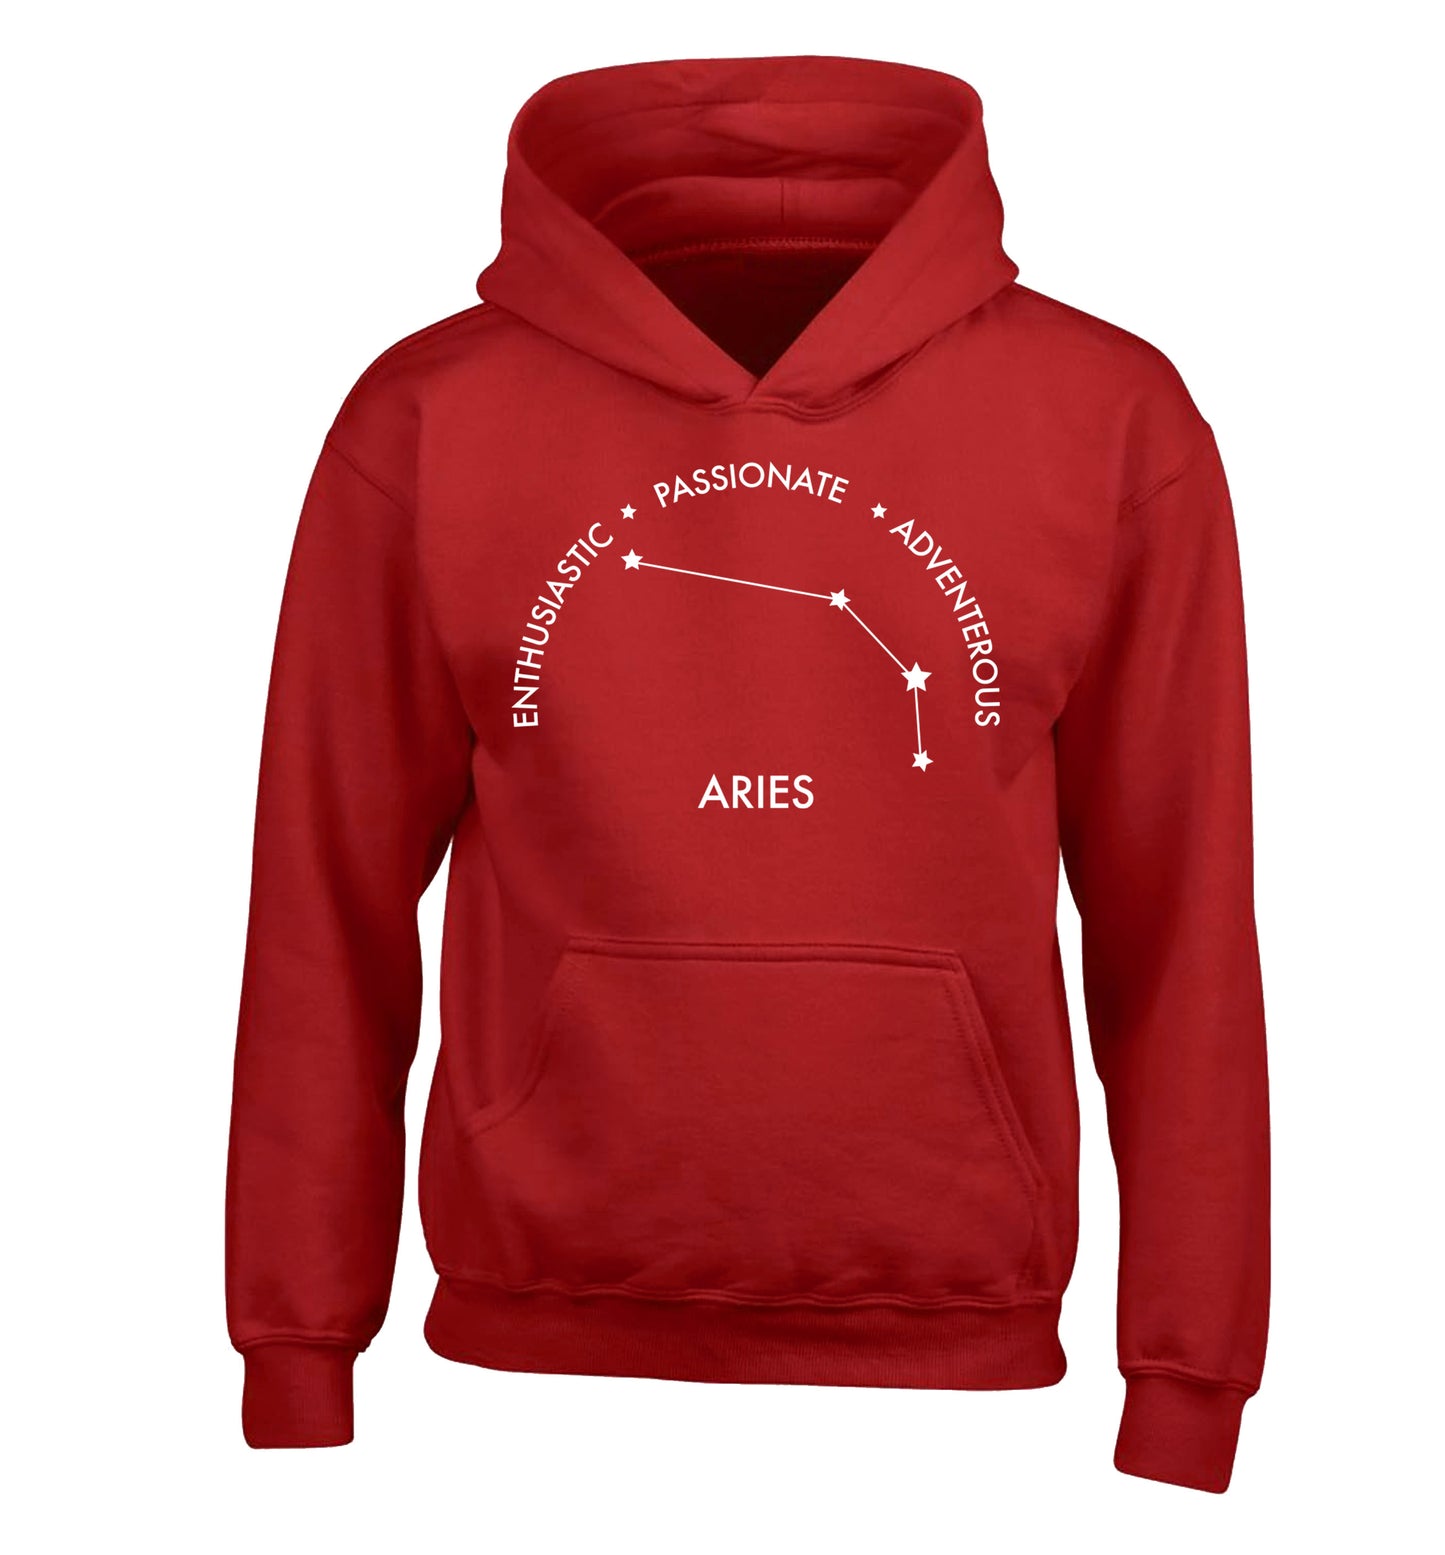 Aries enthusiastic | passionate | adventerous children's red hoodie 12-13 Years